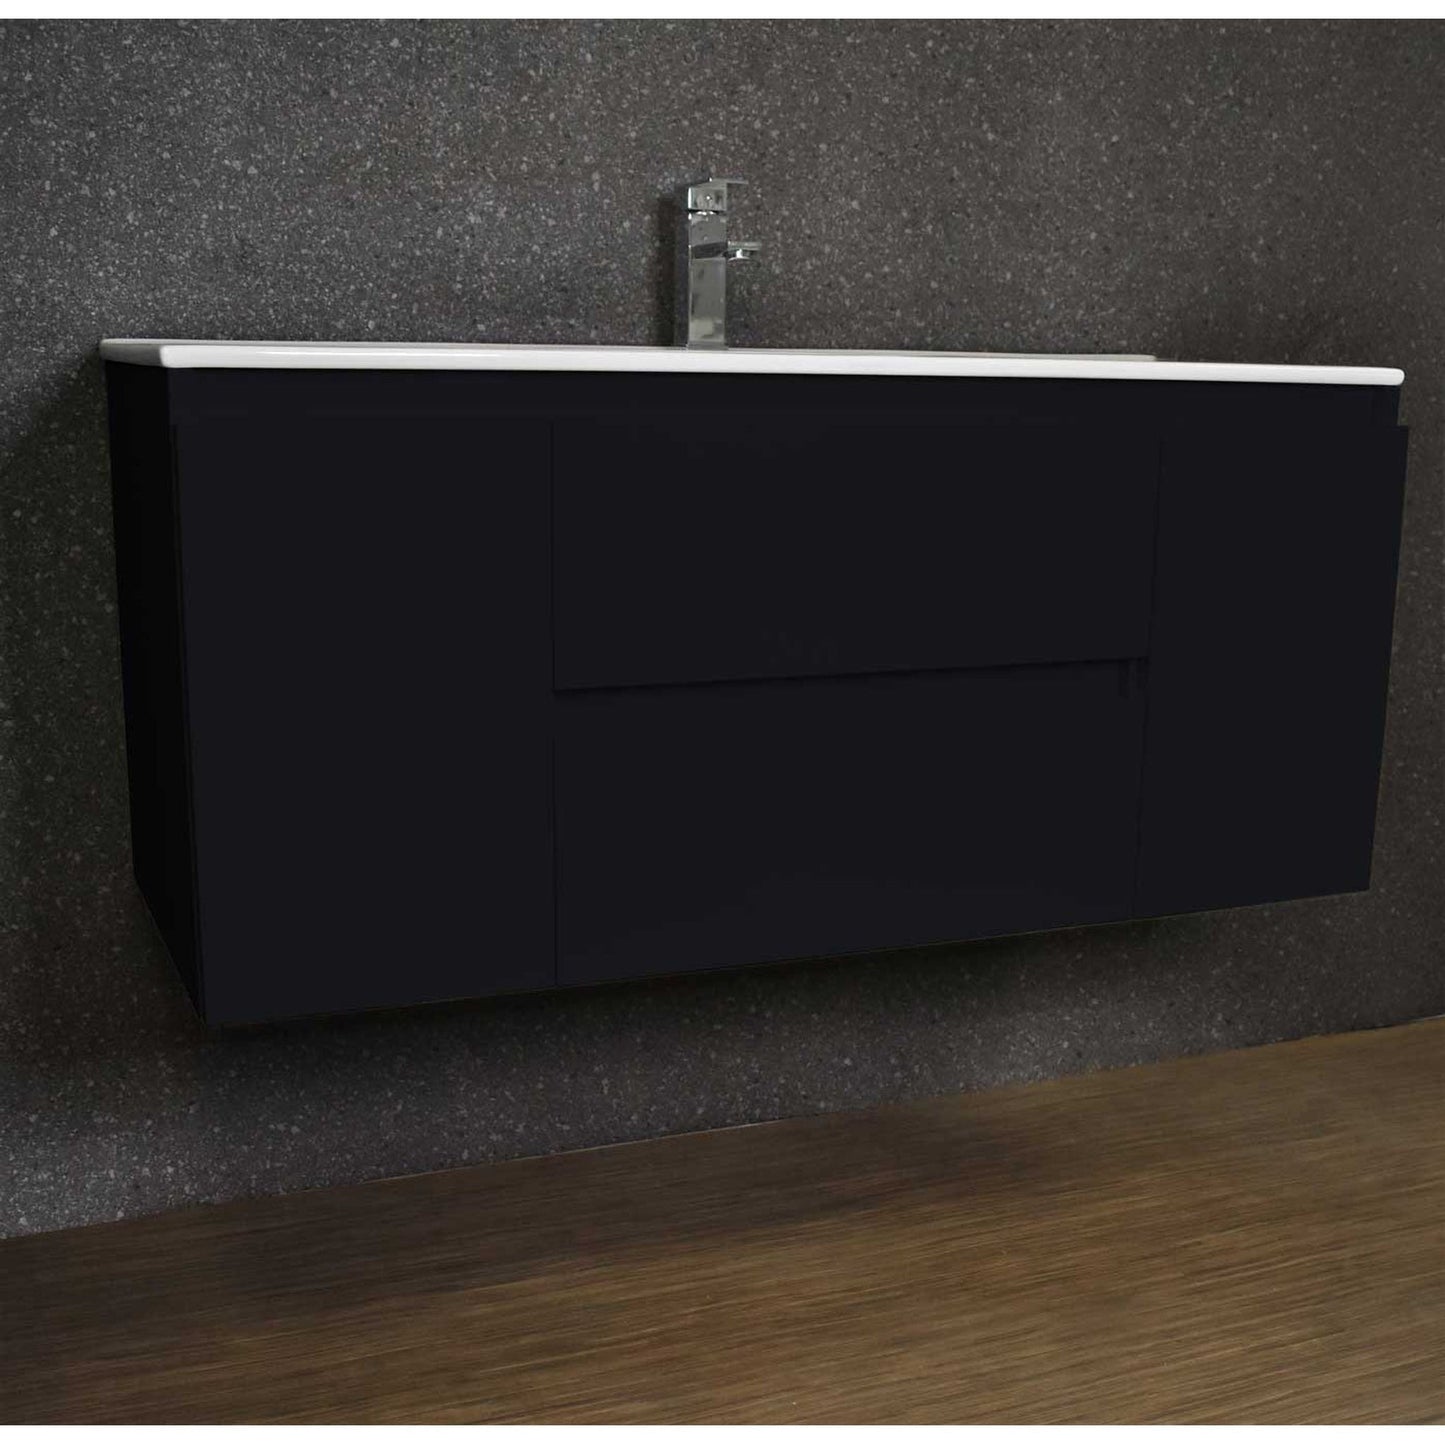 Volpa USA Salt 48" x 18" Black Wall-Mounted Floating Bathroom Vanity With Drawers, Integrated Porcelain Ceramic Top and Integrated Ceramic Sink